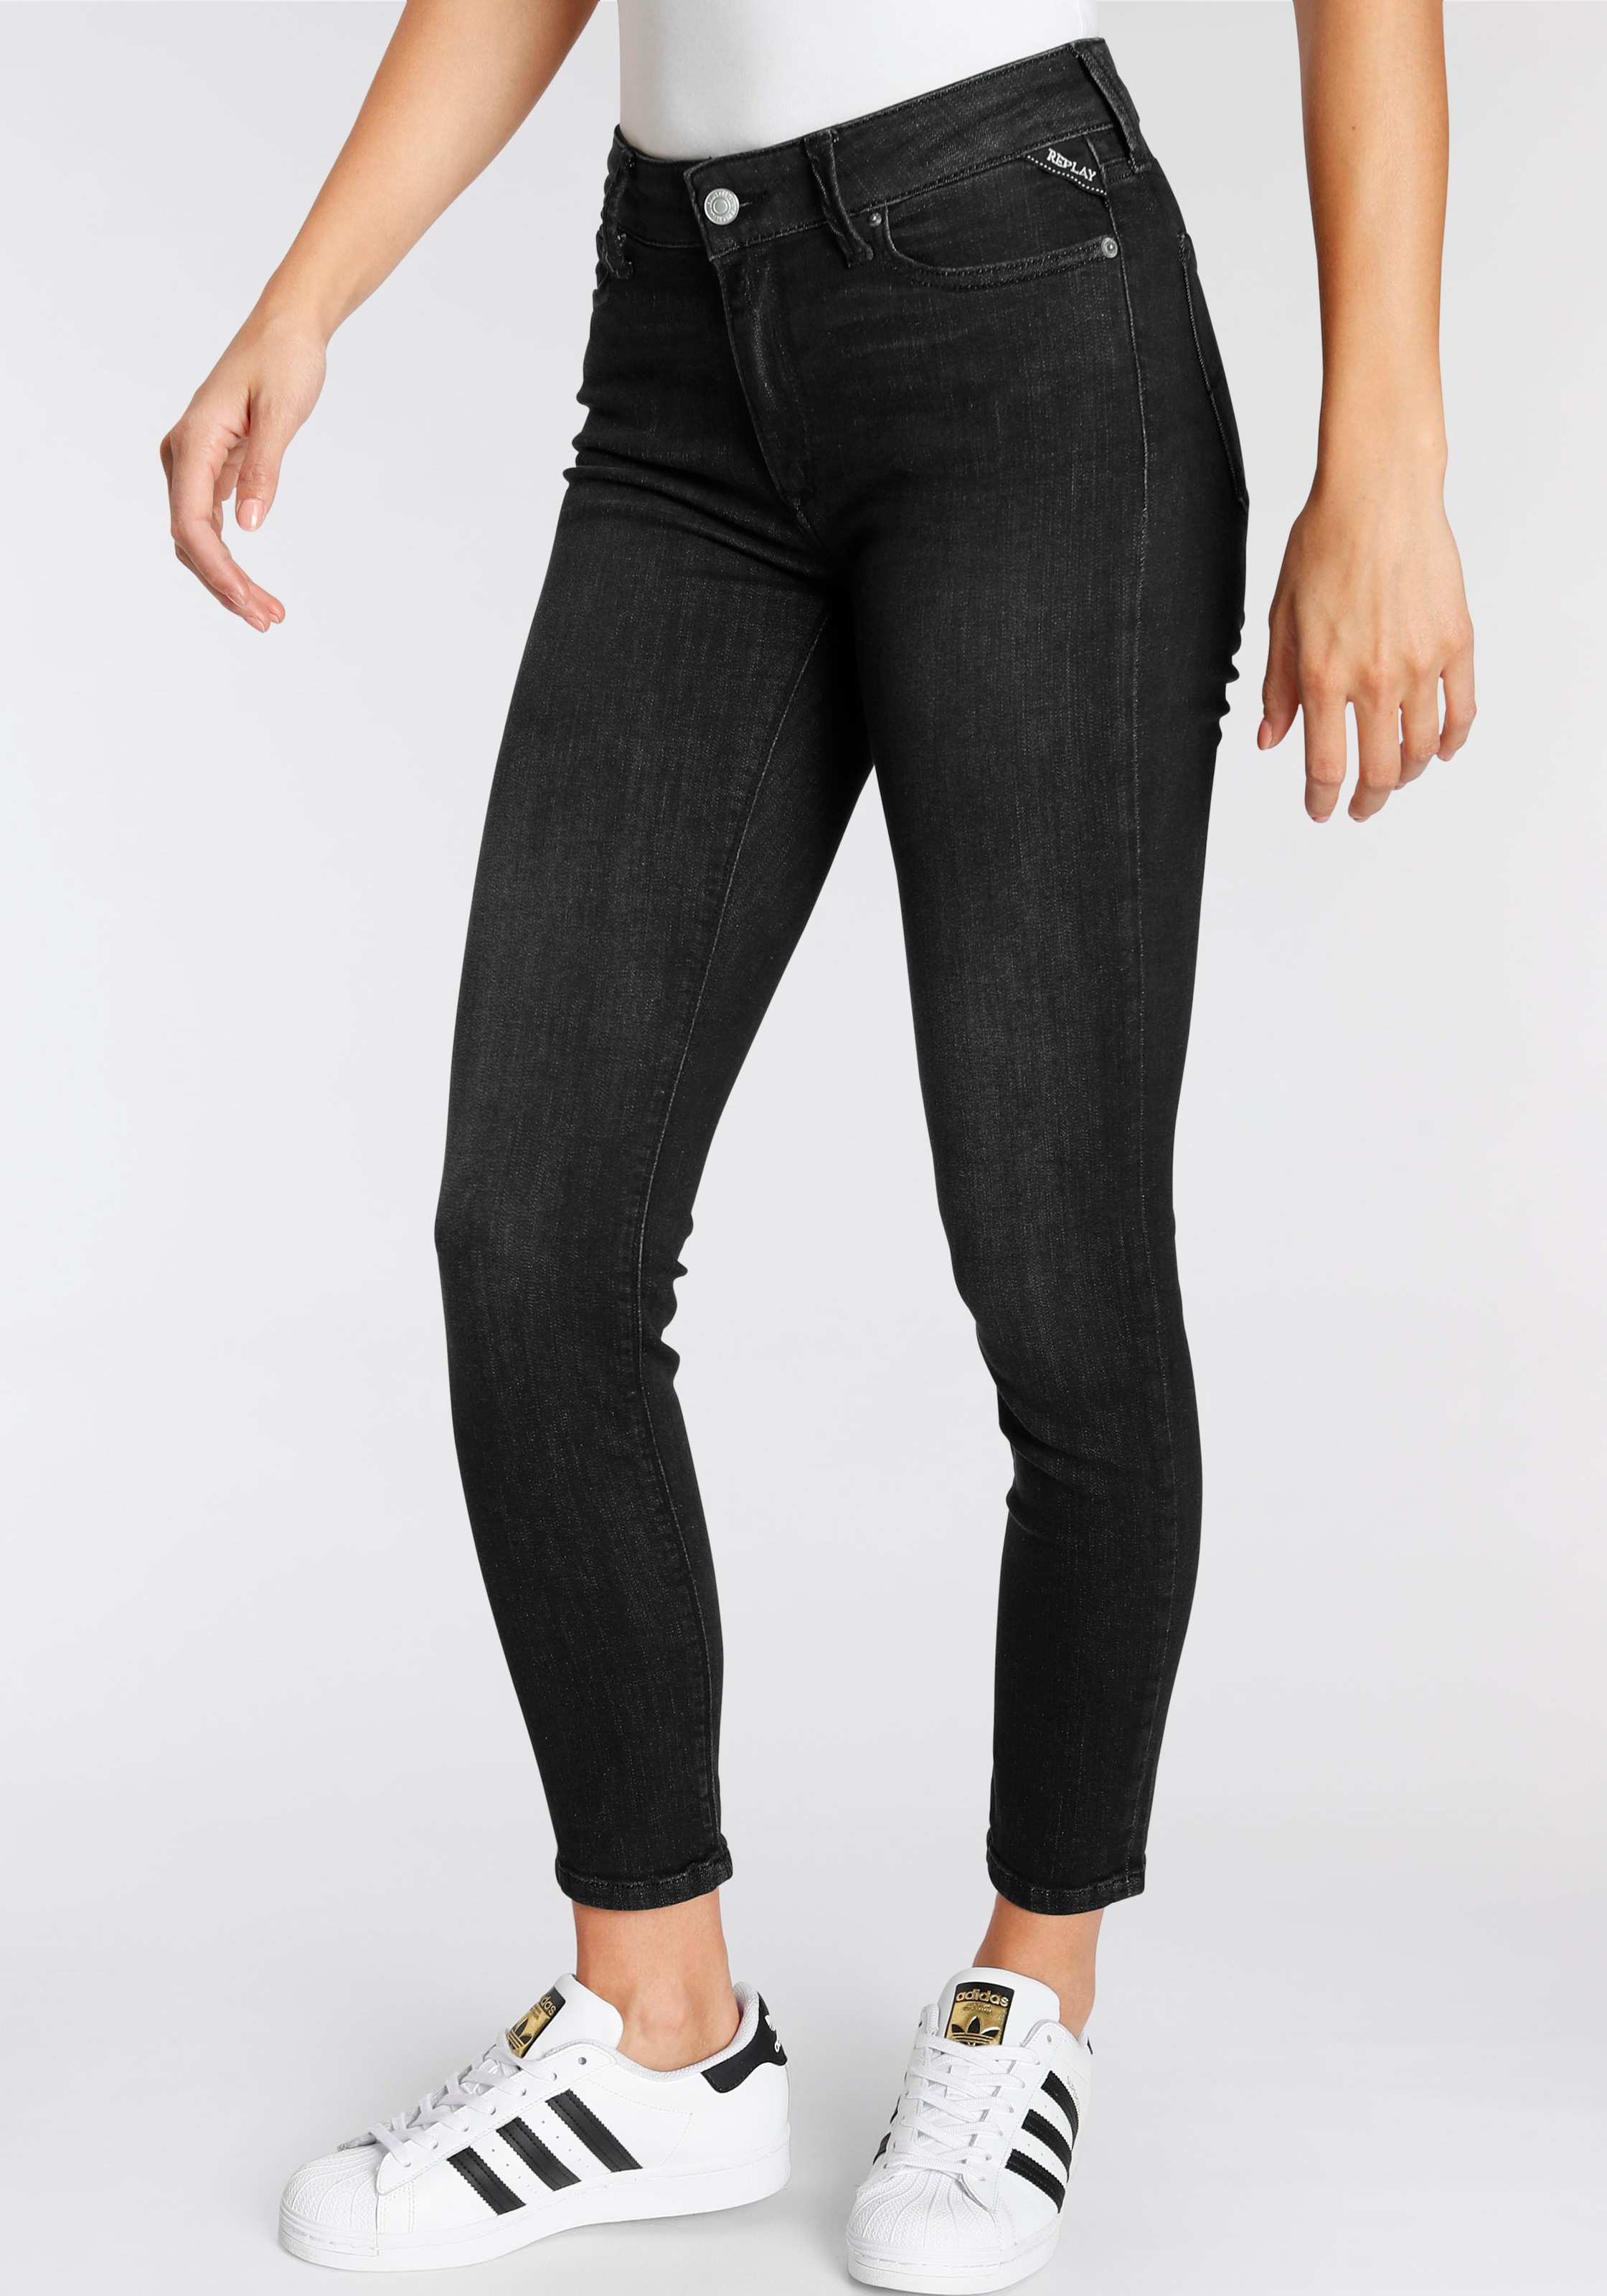 Replay Skinny-fit-Jeans »Luzien«, POWER STRETCH - High Waist bei OTTOversand